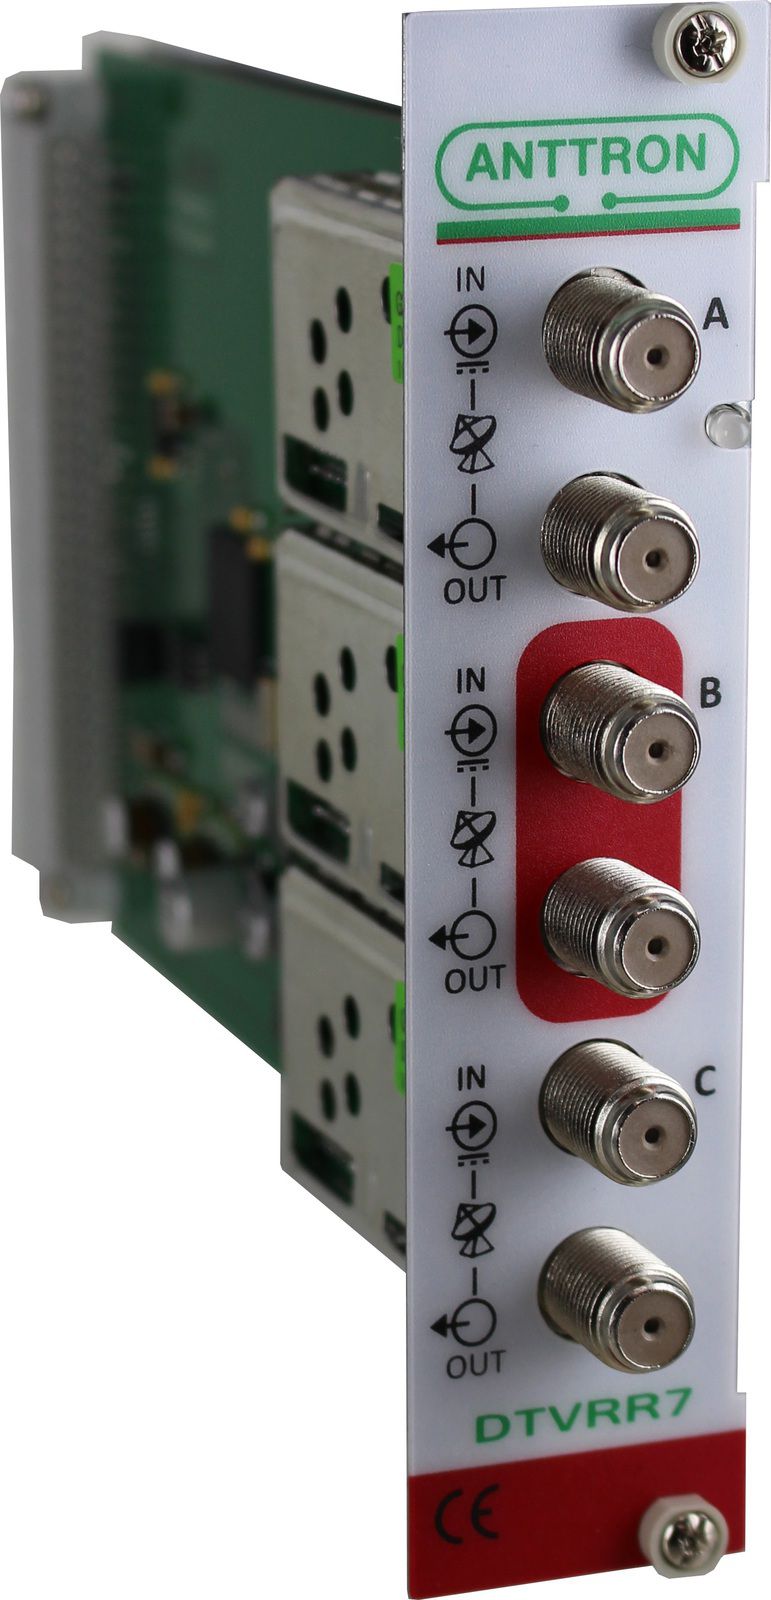 Anttron DTVRR7 3 x DVB-S2 Module with 3 satellite inputs